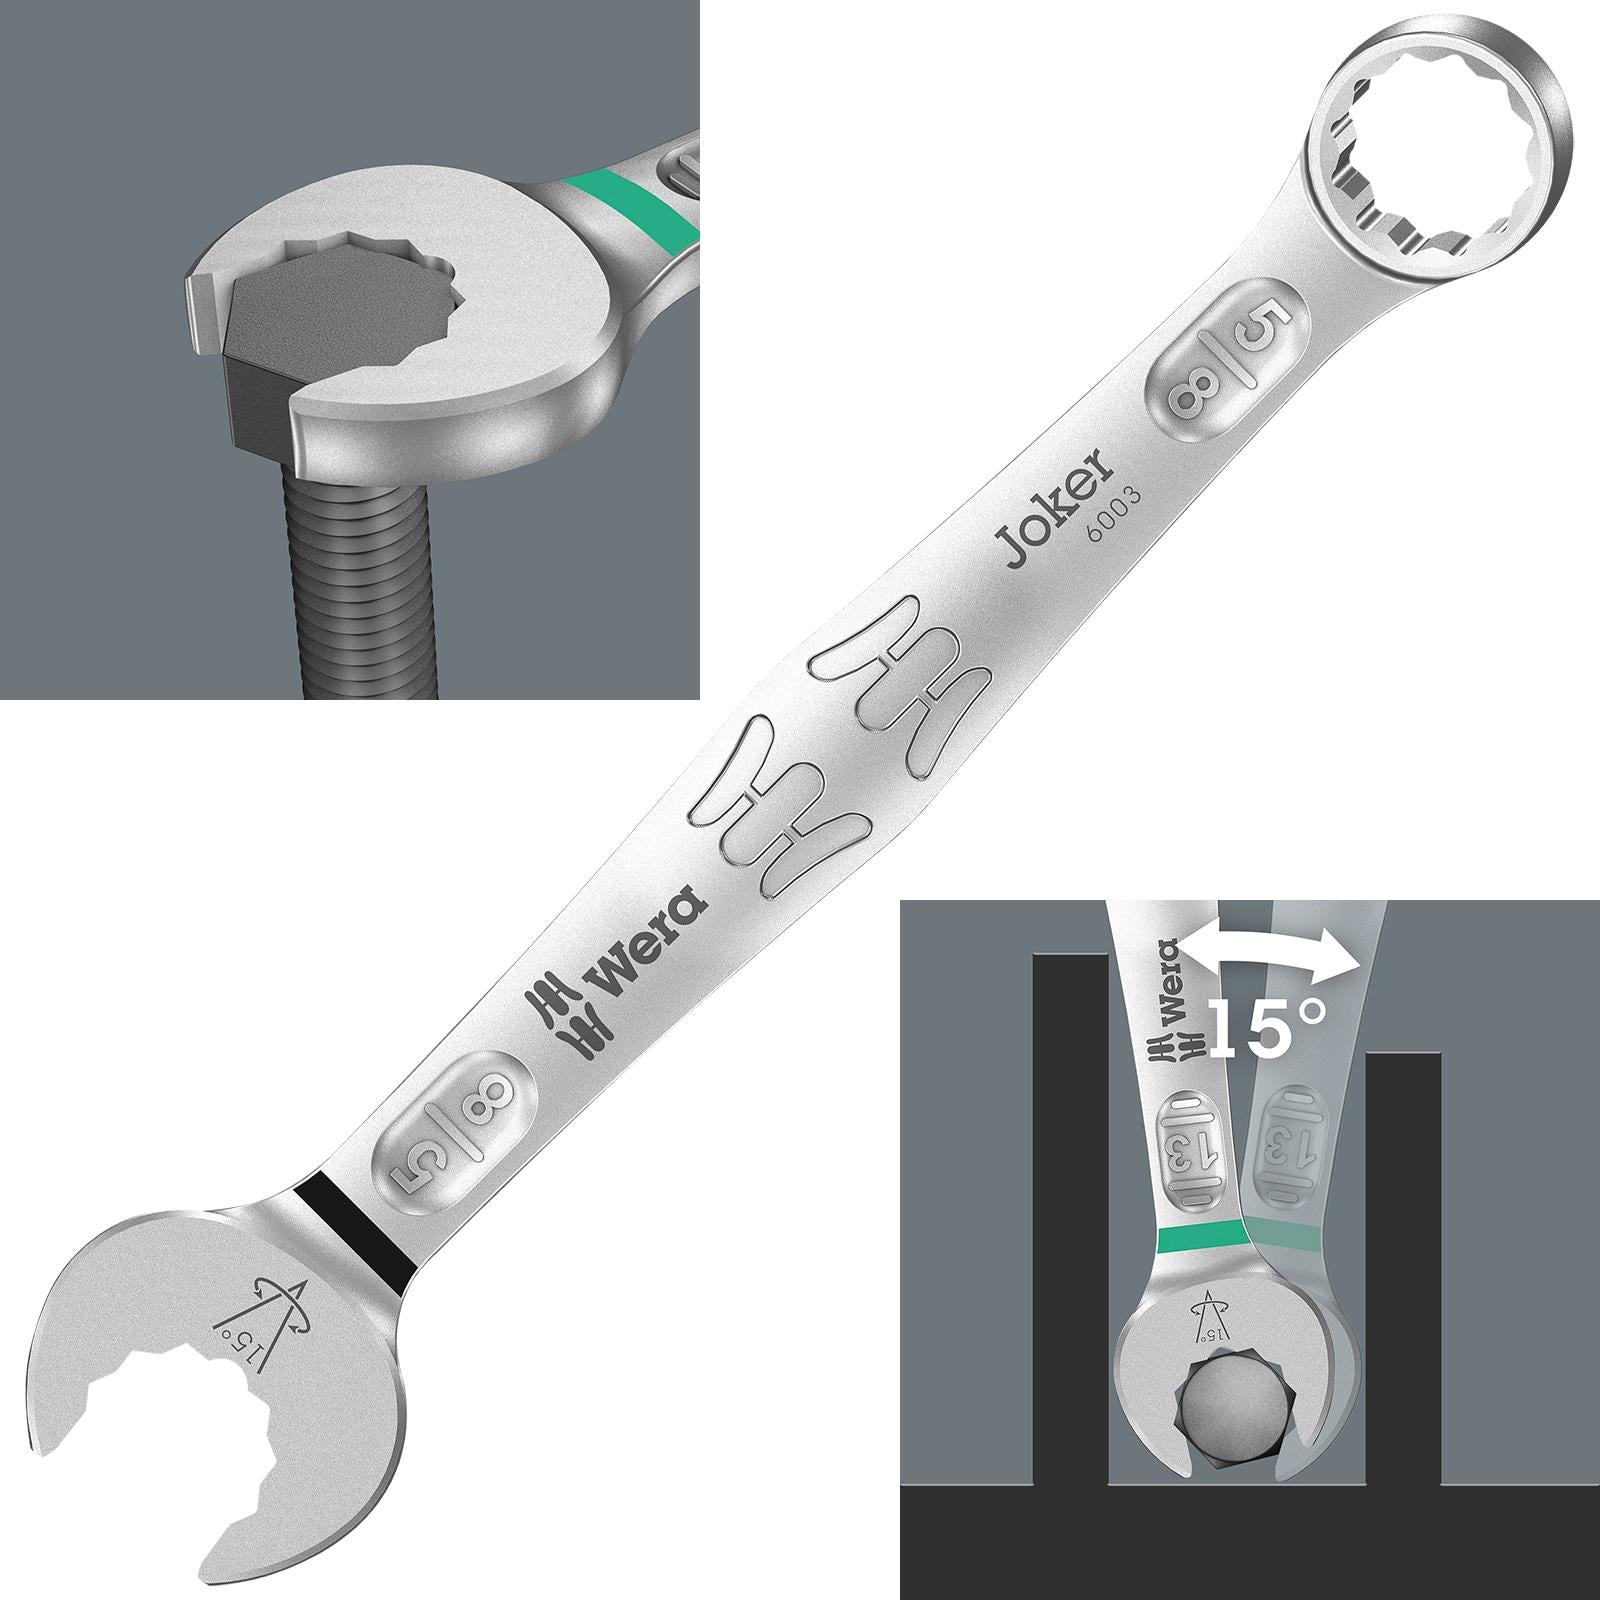 Wera Joker Adjustable Self-setting spanner wrench 6004-S. This thing is  pretty cool and effective. 